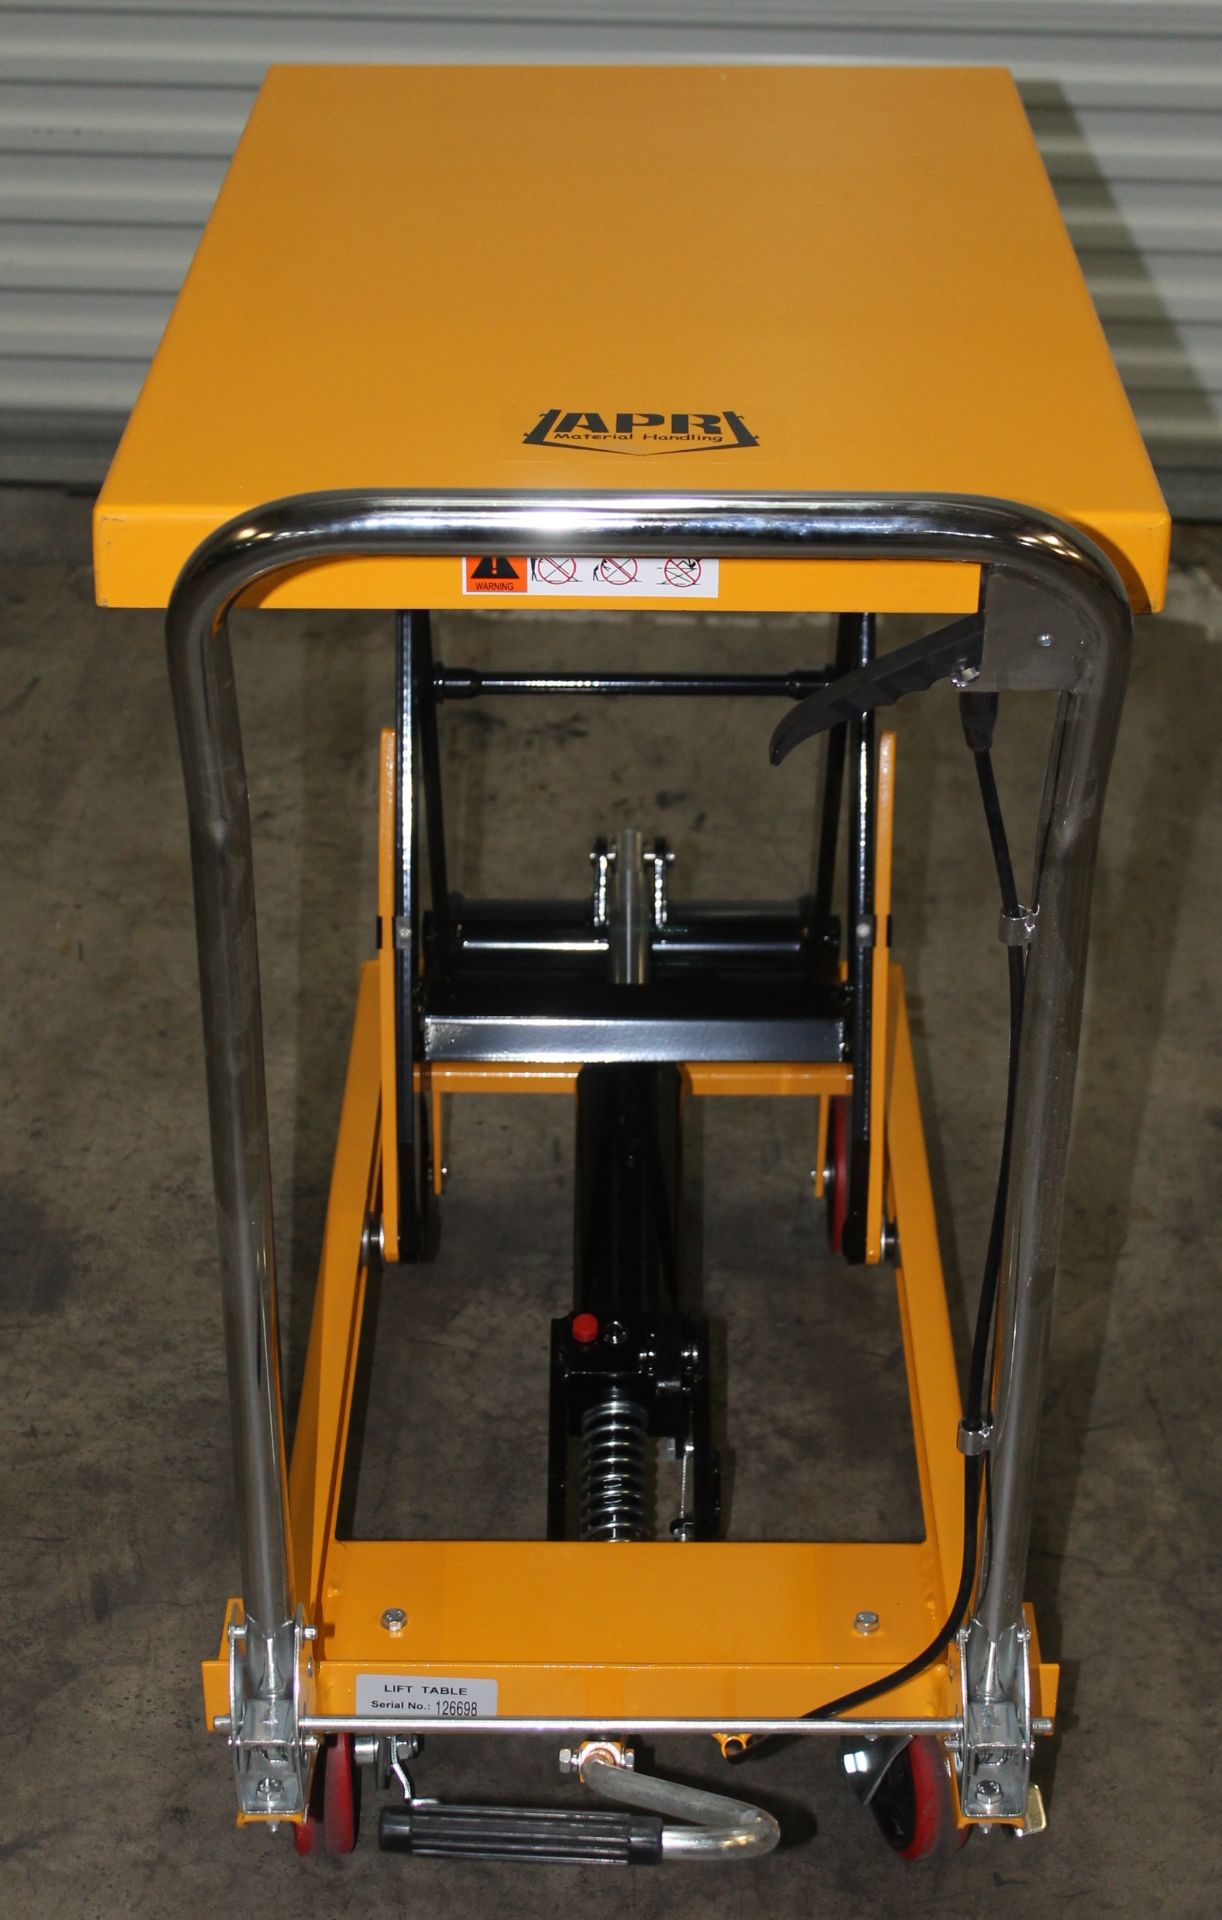 1102 LBS CAP. ROLLING SCISSOR LIFT TABLE, CAPACITY: 1102 LBS., MAX HEIGHT: 22", TABLE SIZE: 33.66" - Image 7 of 7